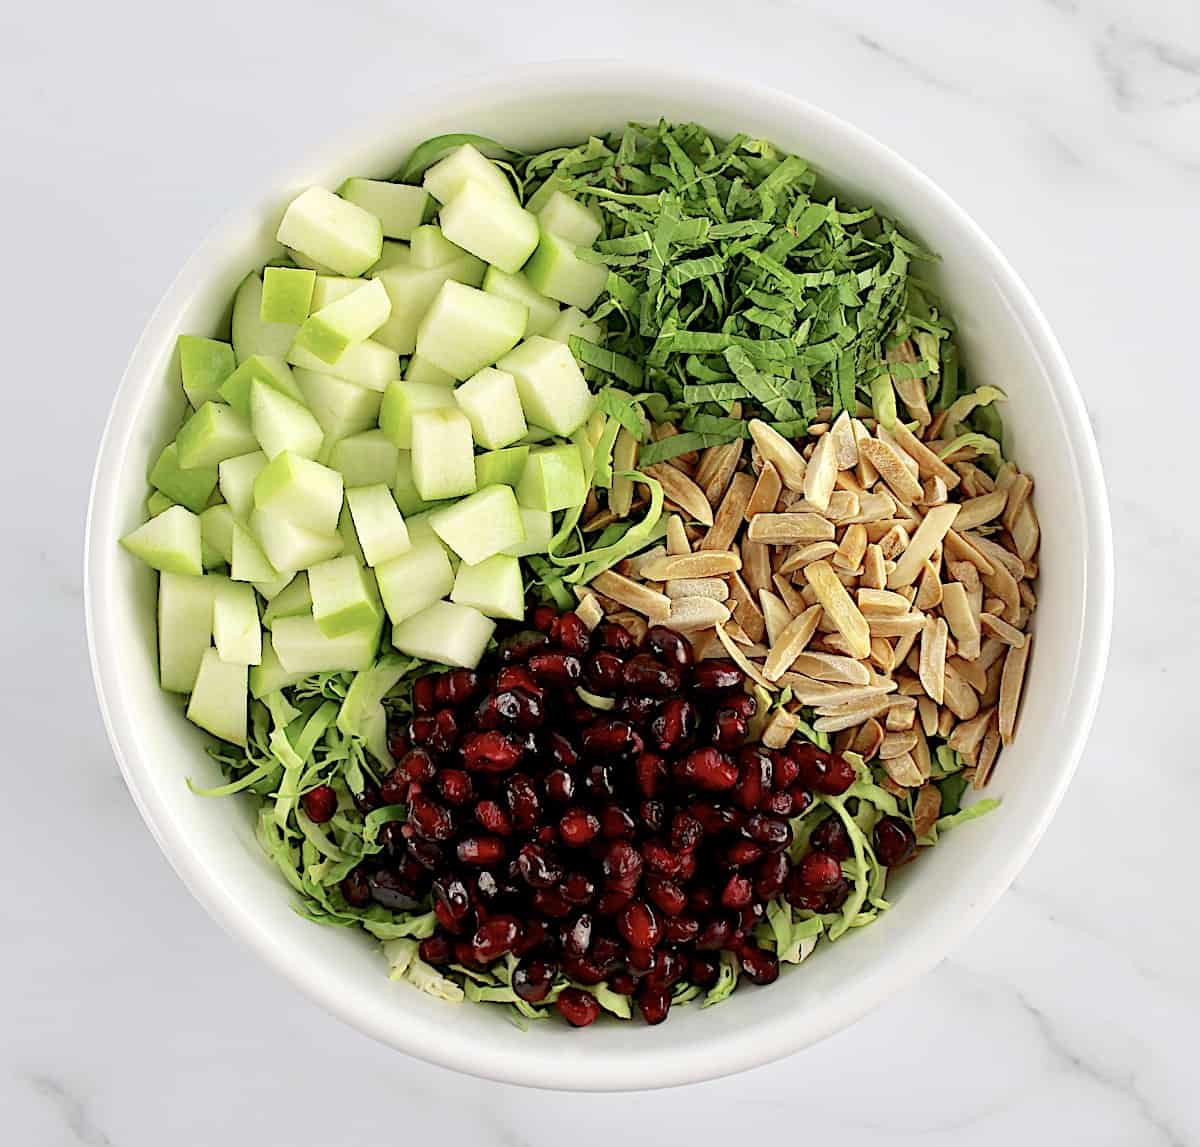 Shredded Brussels Sprouts, pomegranate seeds, slivered almonds, diced green apples and chopped mint in white bowl